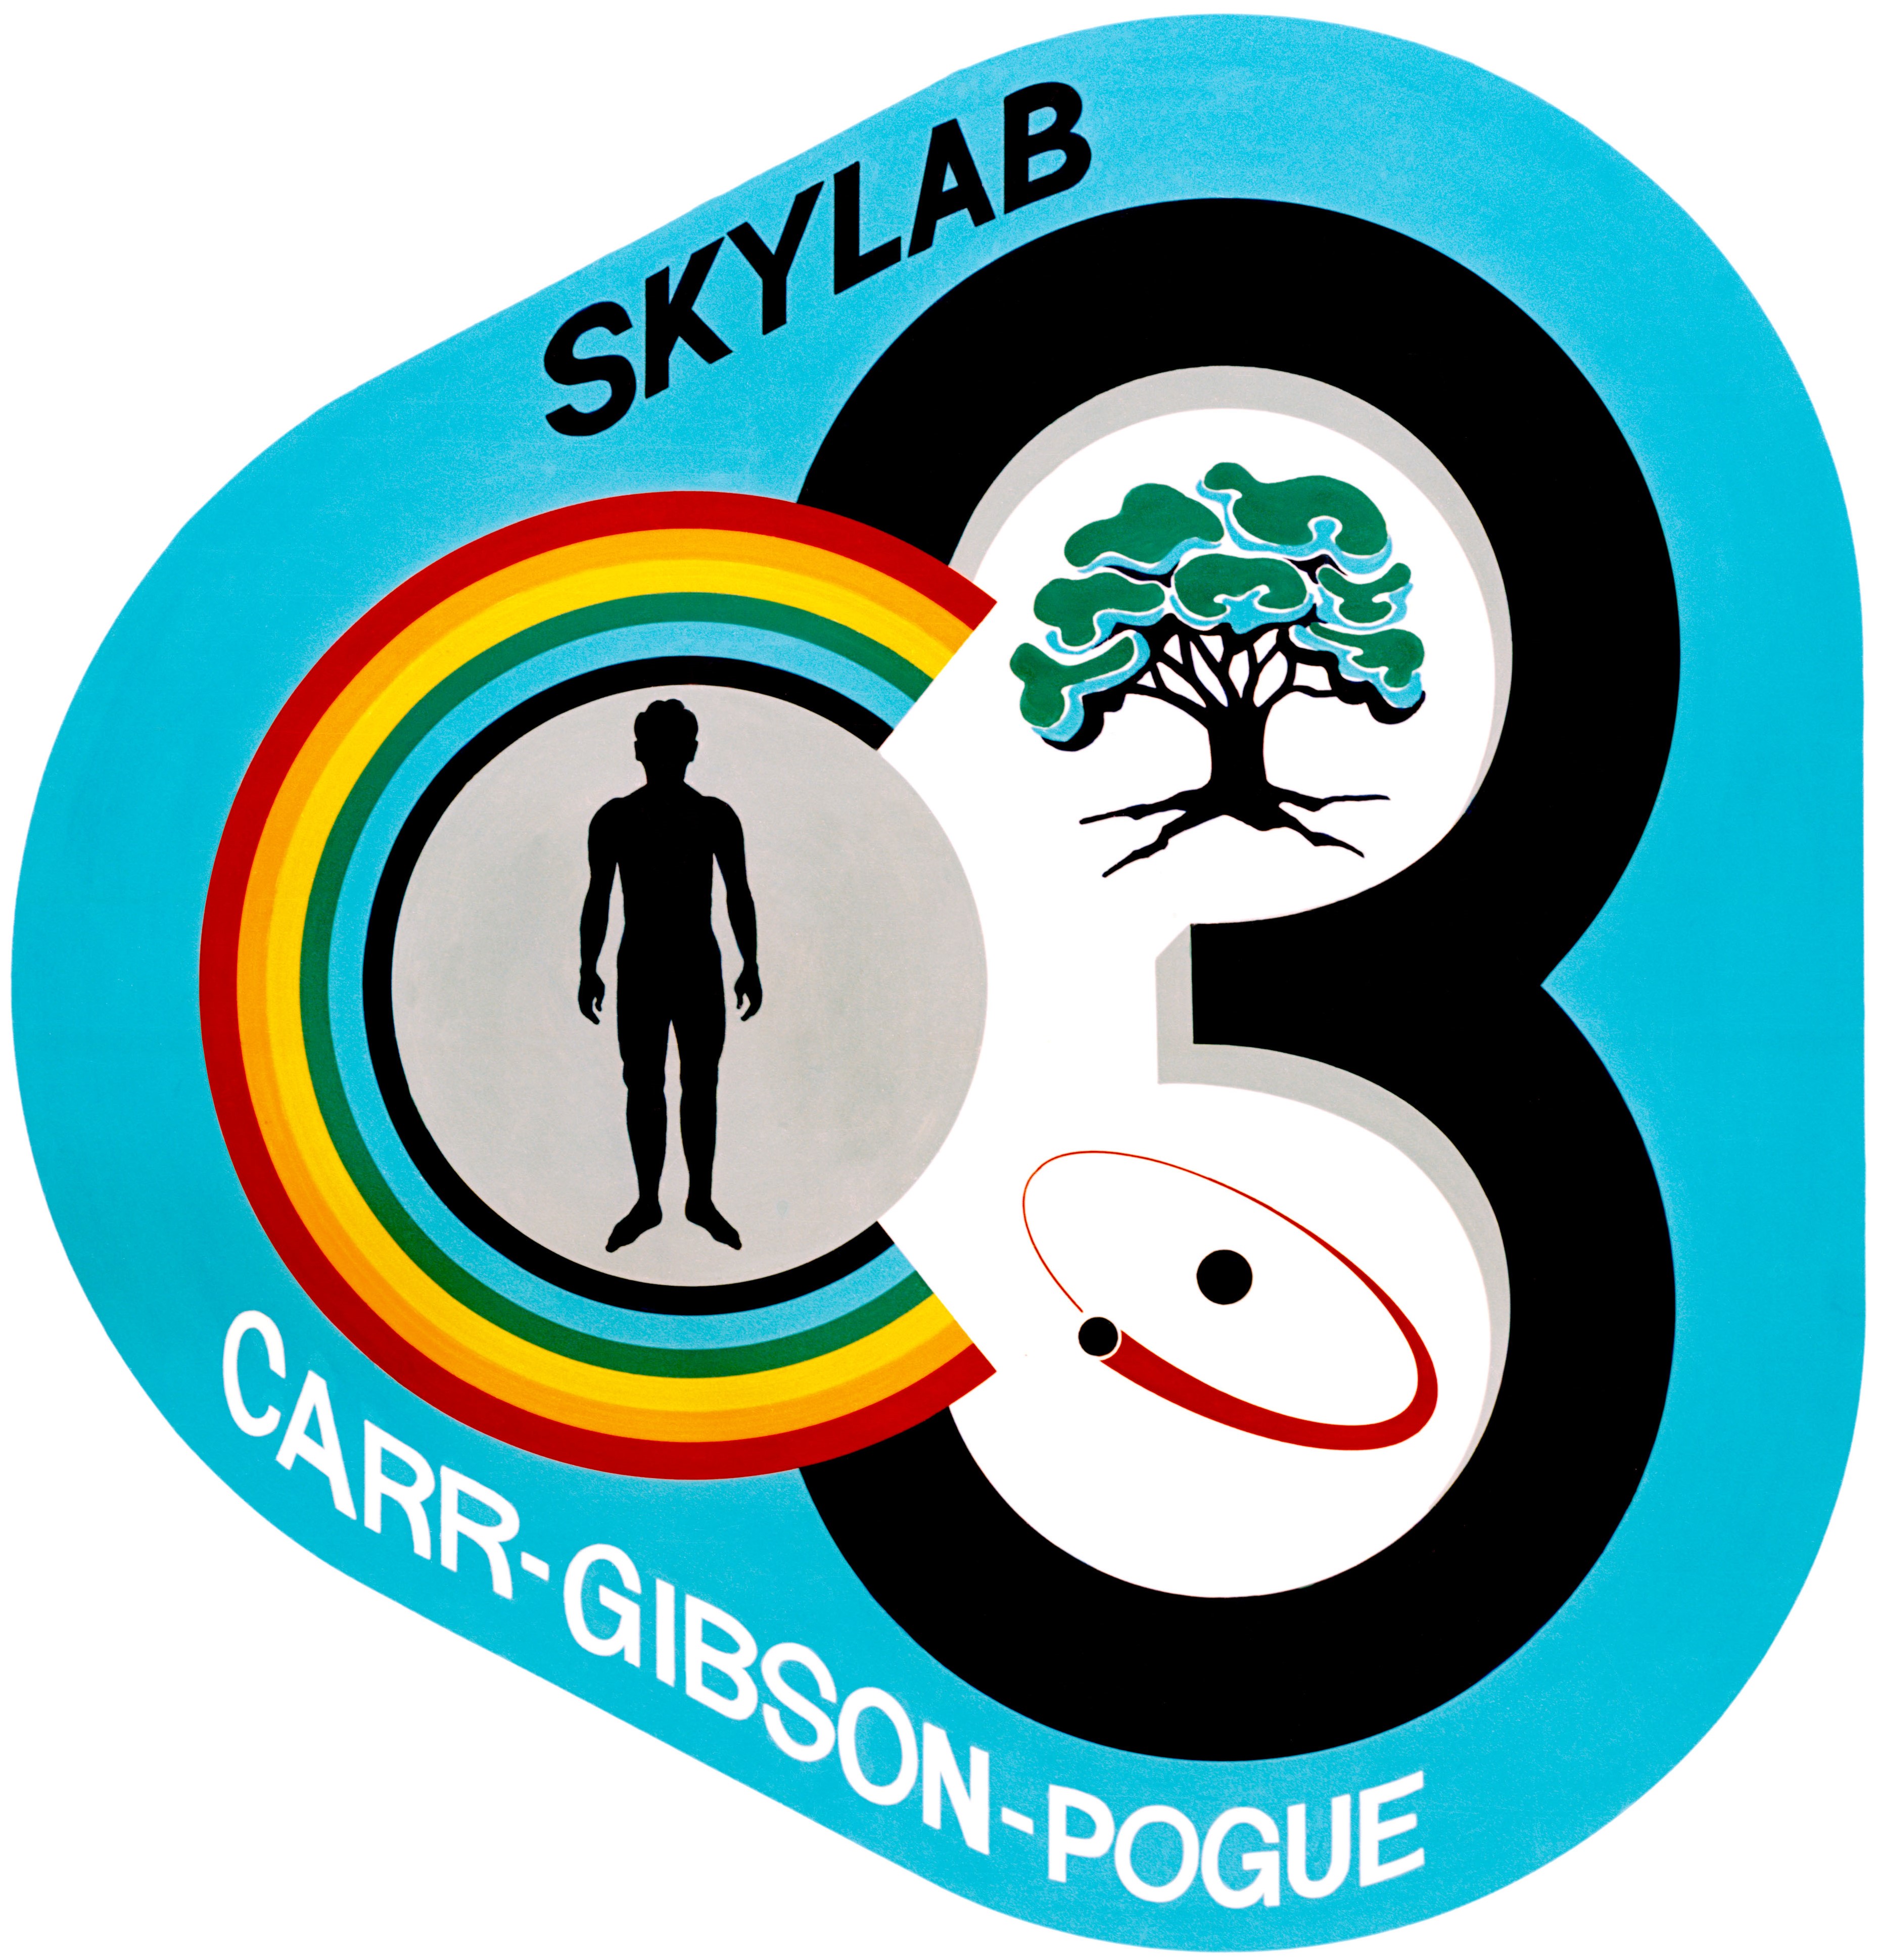 Crew patch of the third and final crewed mission to Skylab